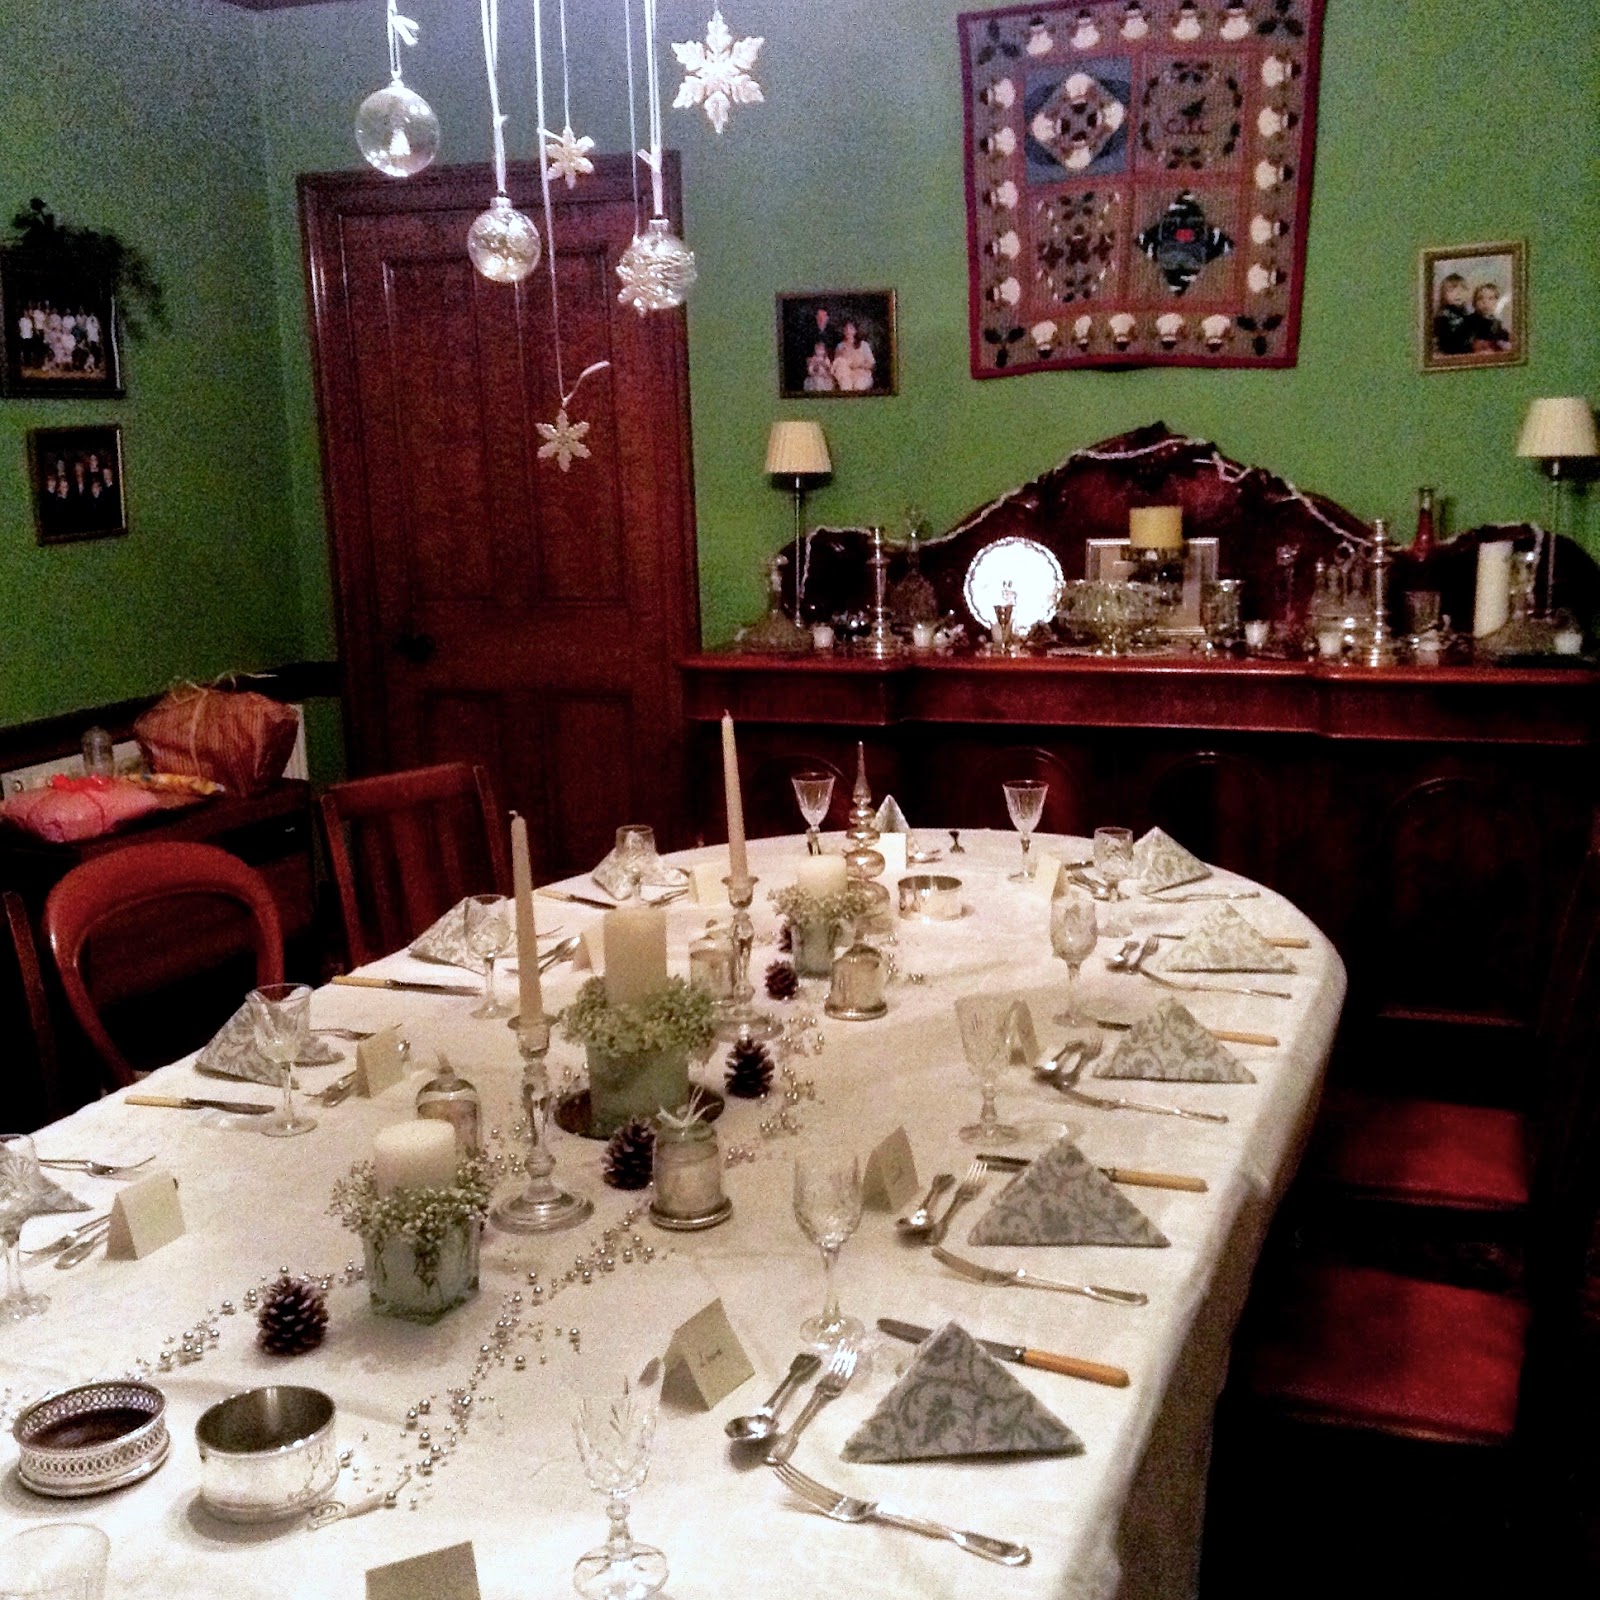 Christmas dinner table with white & silver napkins, candles, pine cones & dangling ornaments on light fixture